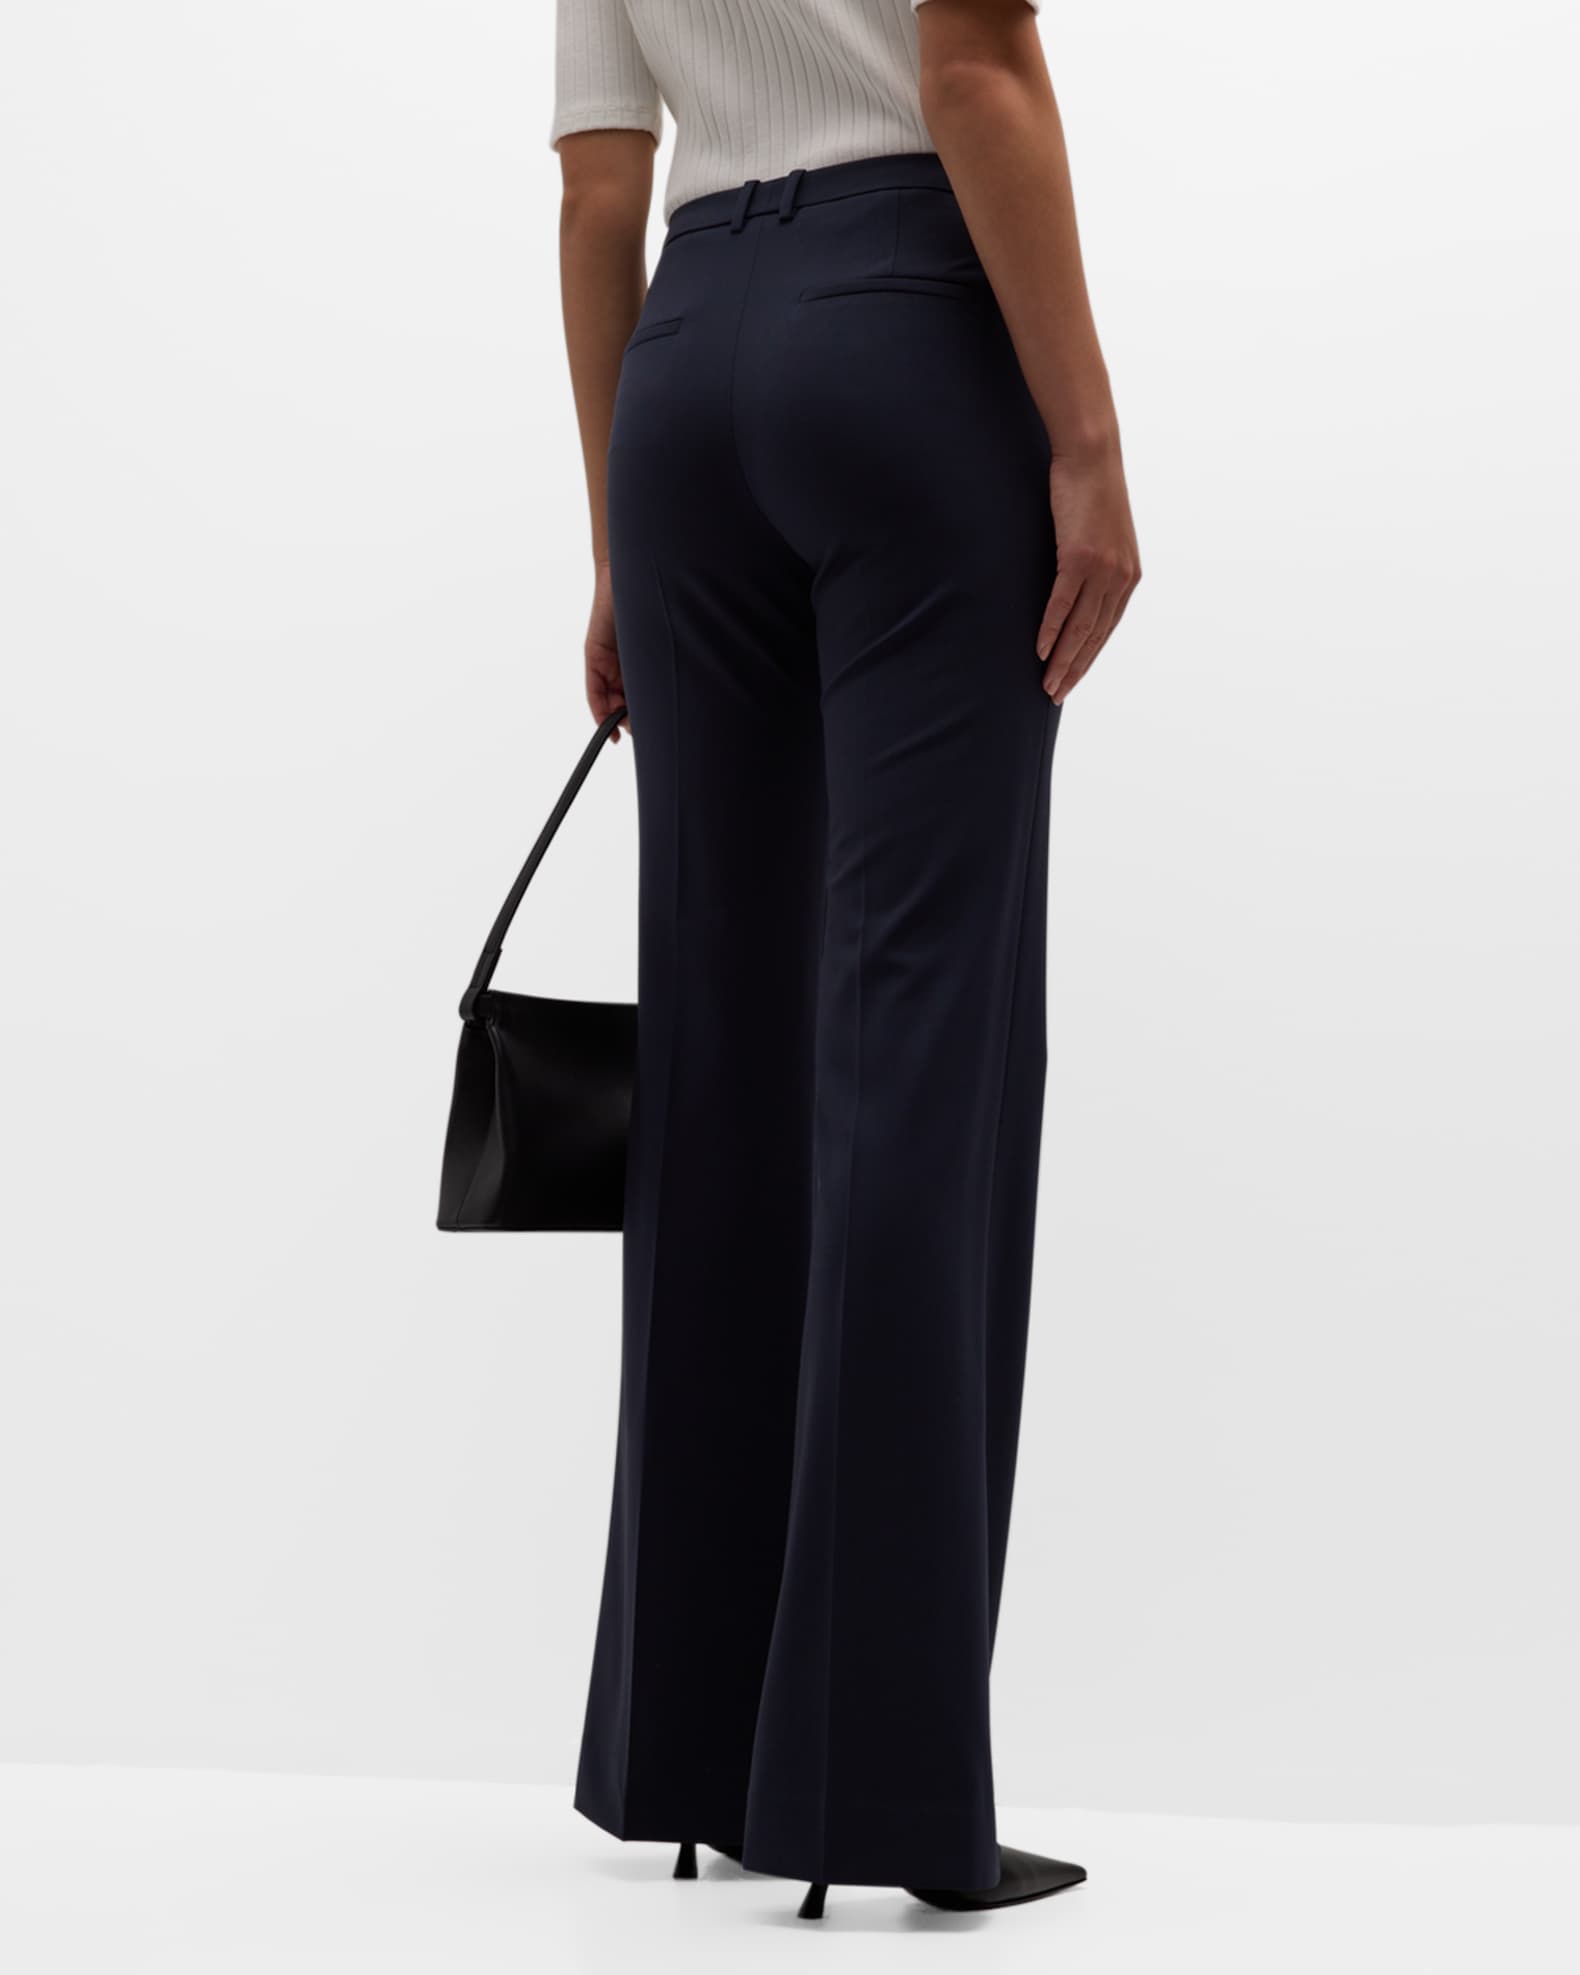 Theory Demitria Good Wool Suiting Pants | Neiman Marcus